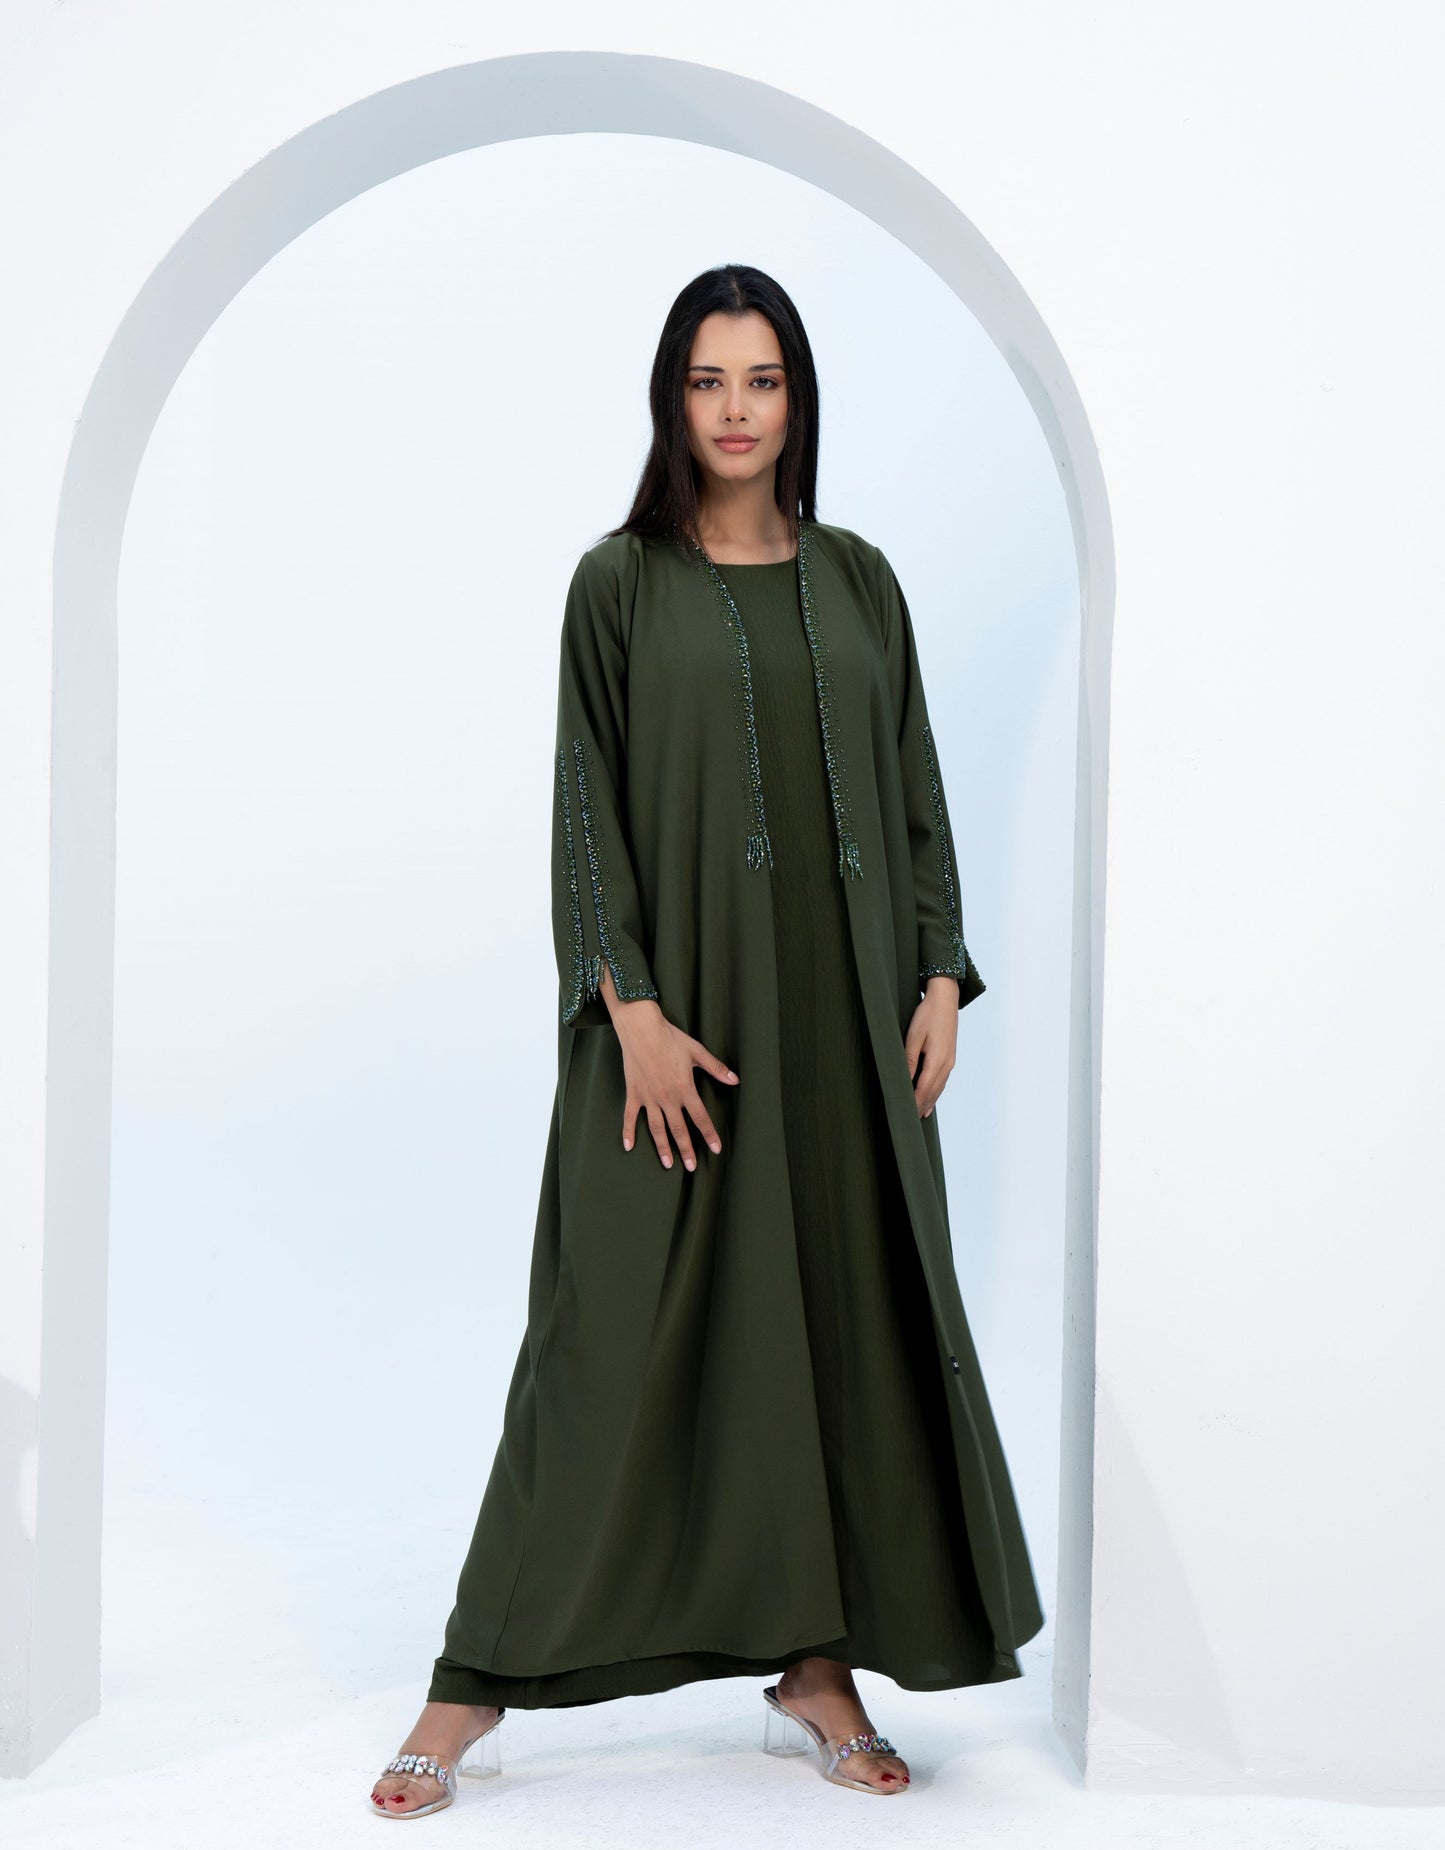 Green Colored V-Neck Abaya with Stunning Embellishments on Front Top Half and Sleeves